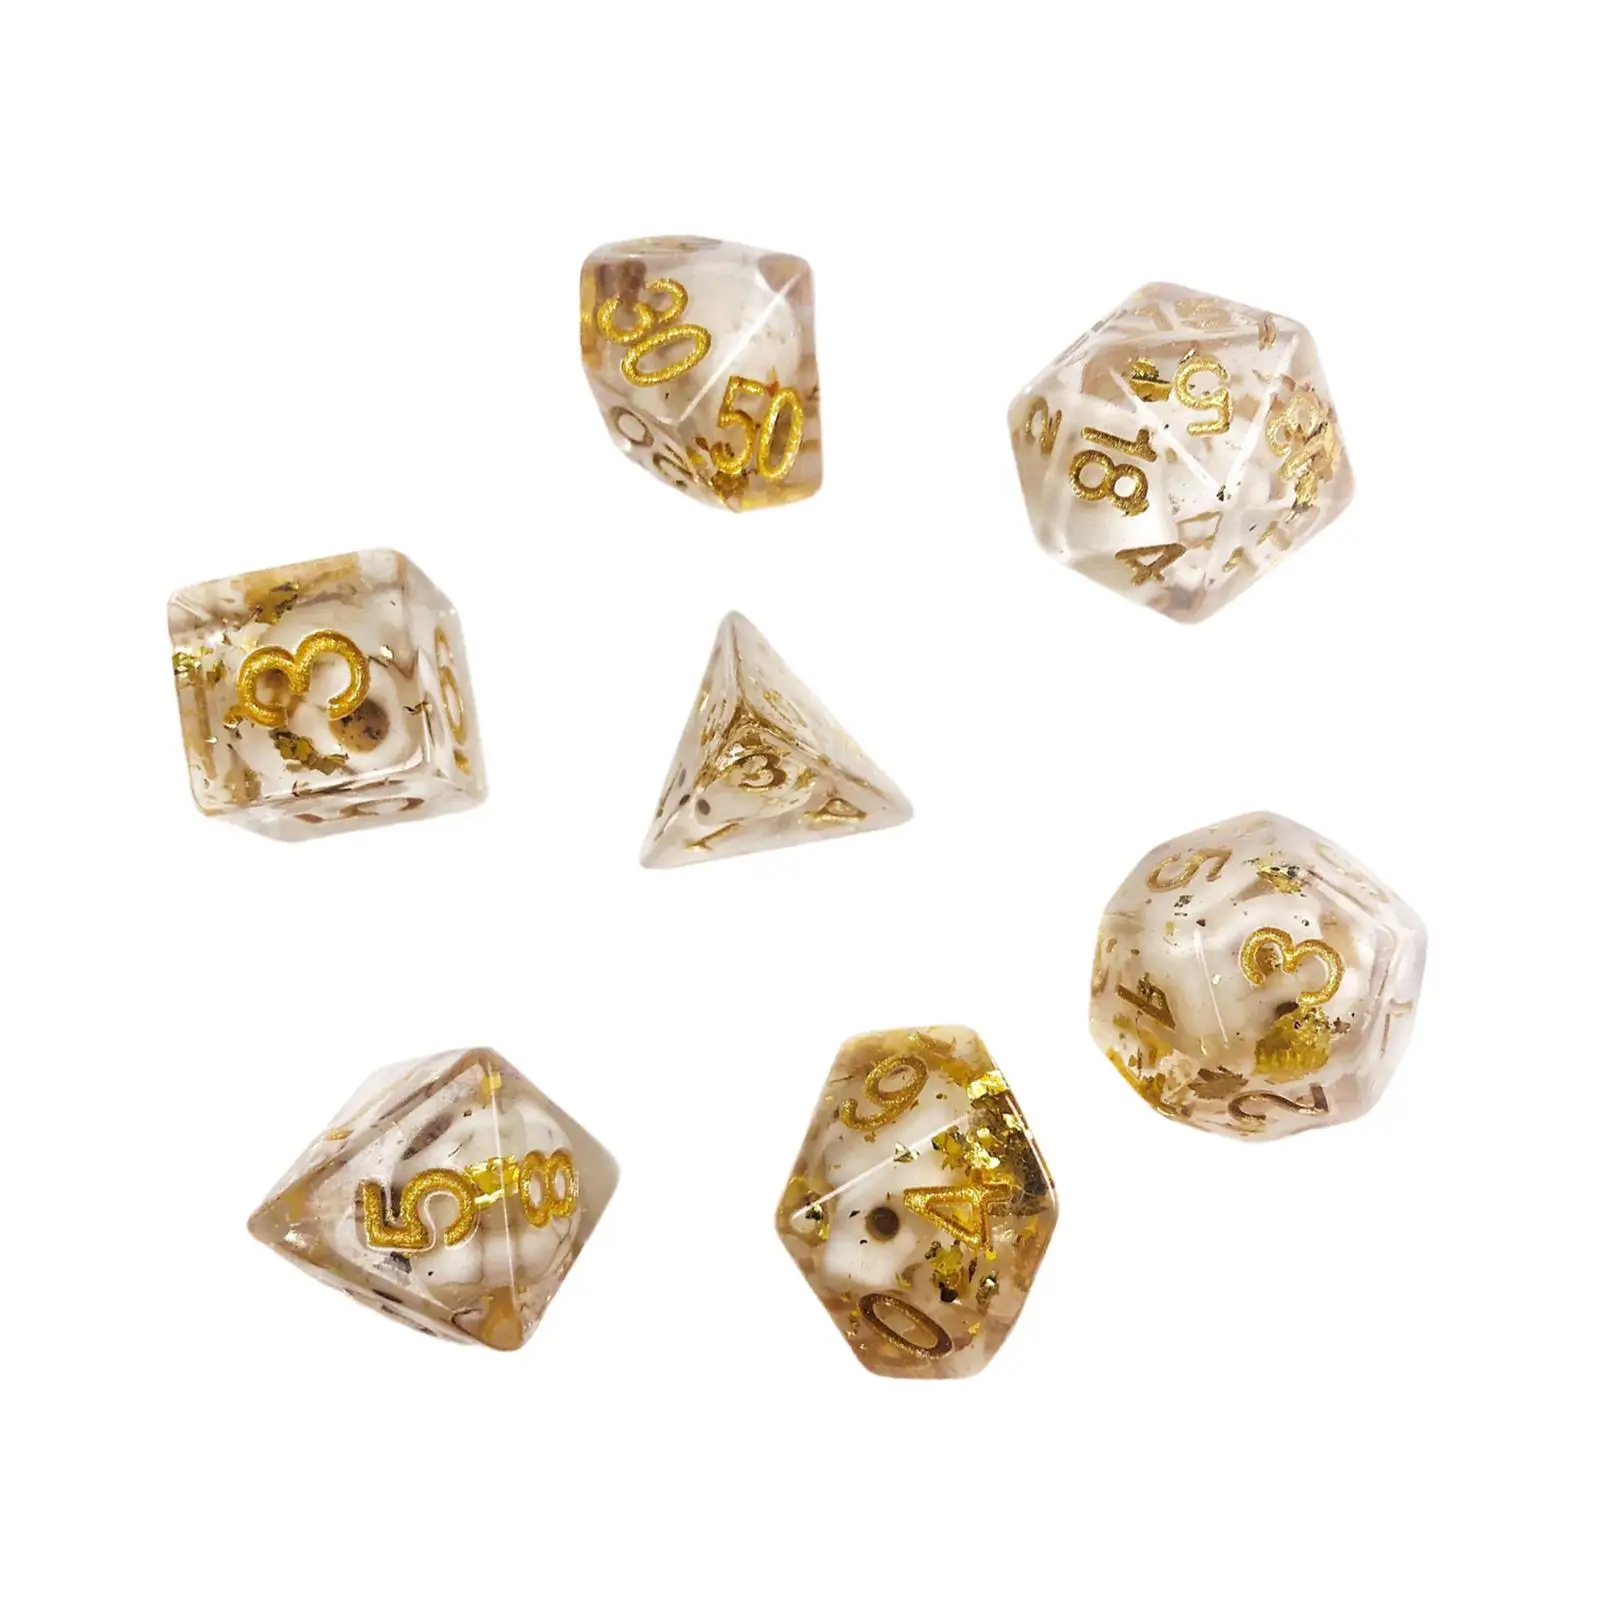 7 Pieces Acrylic Polyhedral Dices Built in Skull for Tabletop Game Role Play